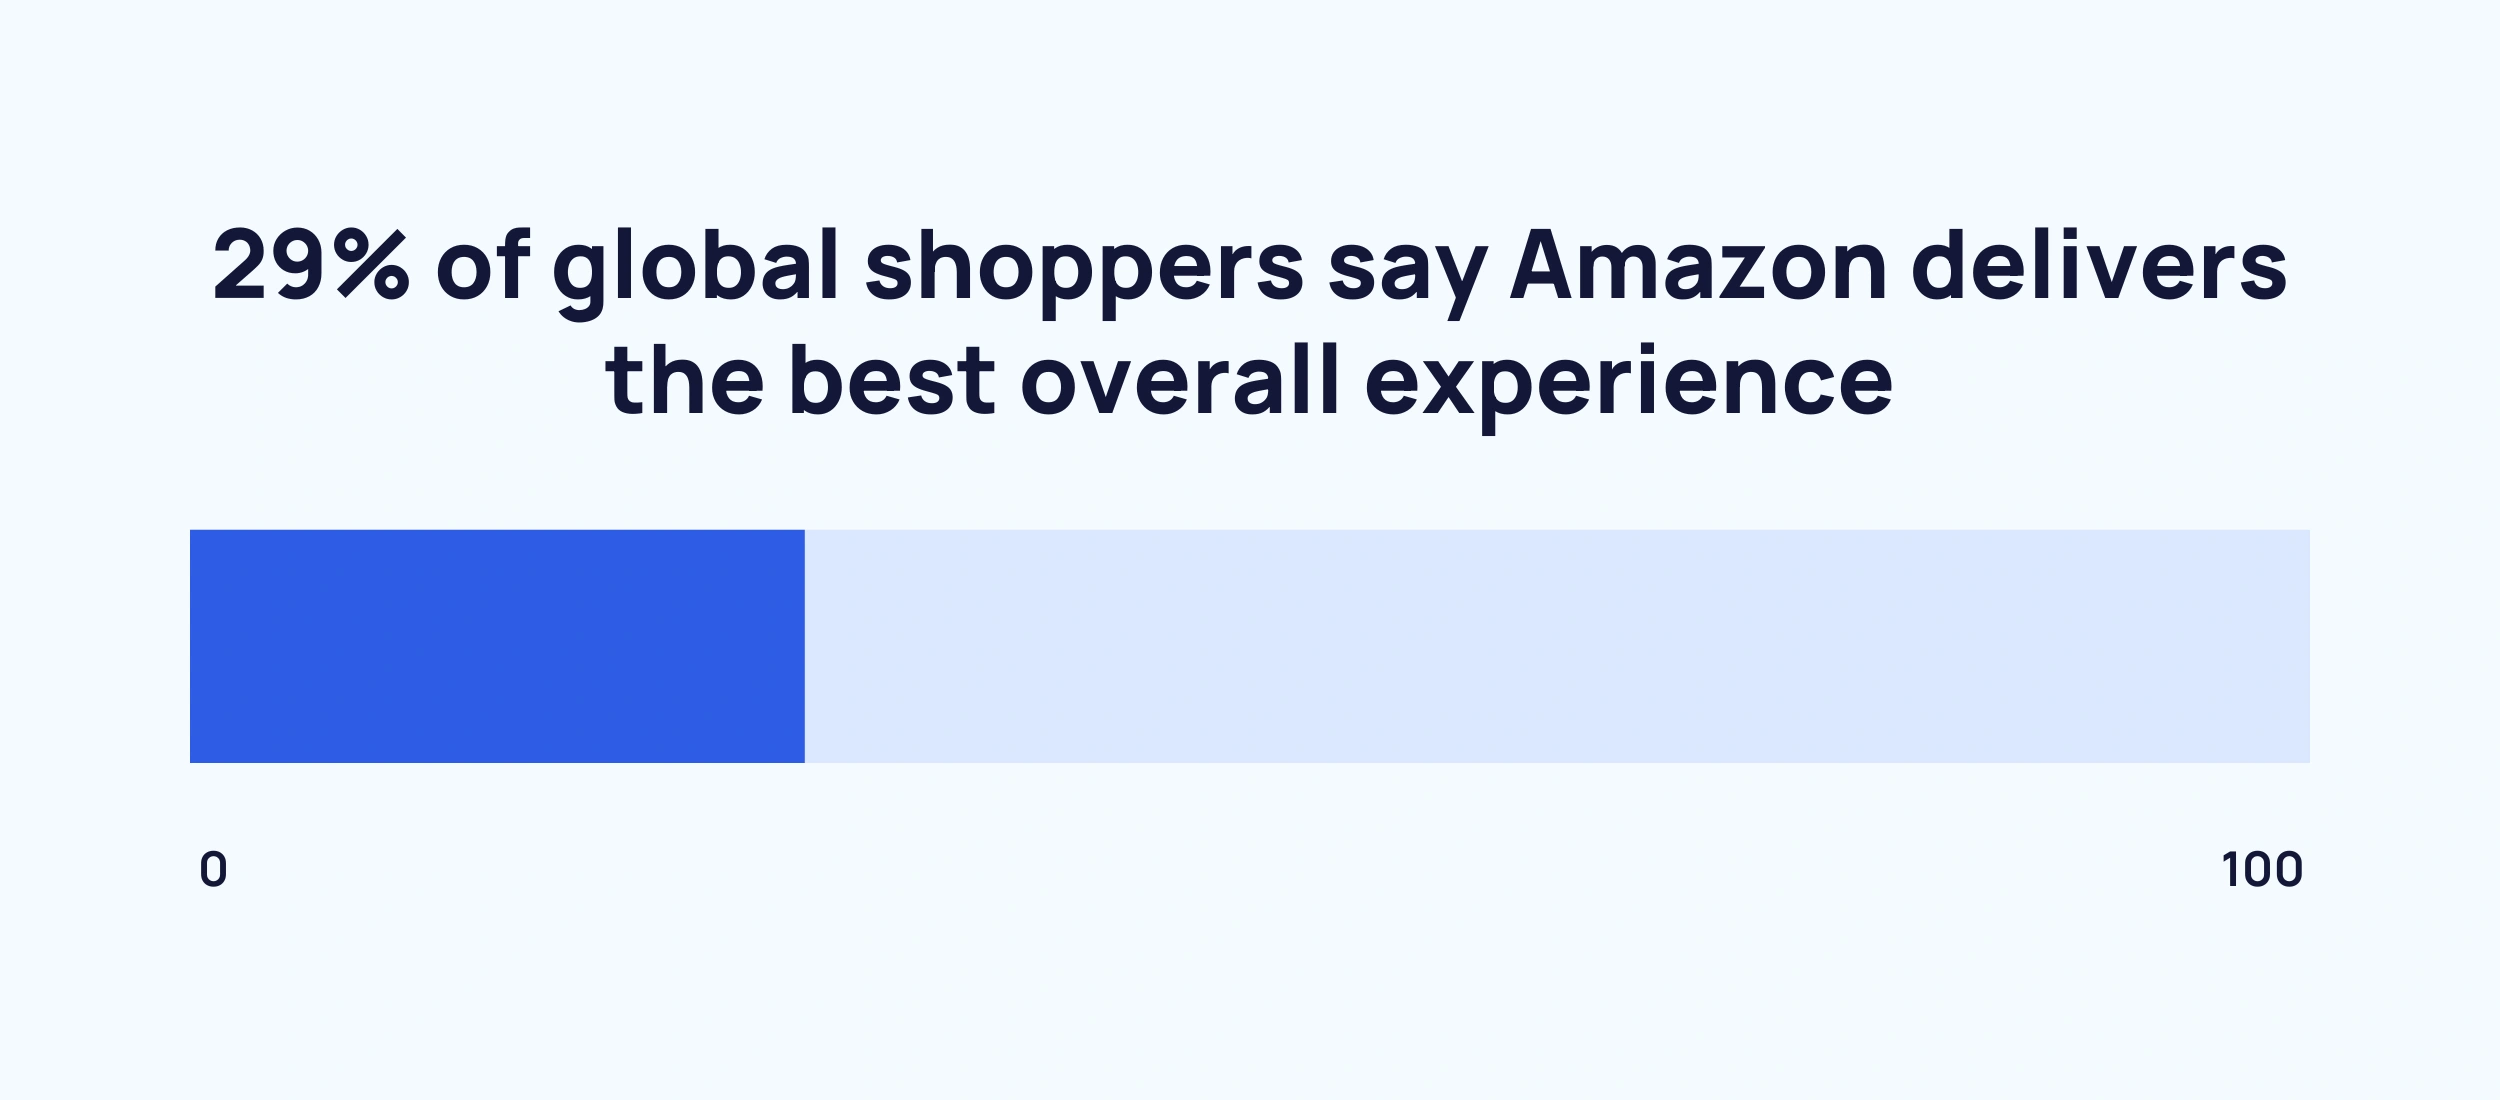 amazon-best-total-experience-min.png